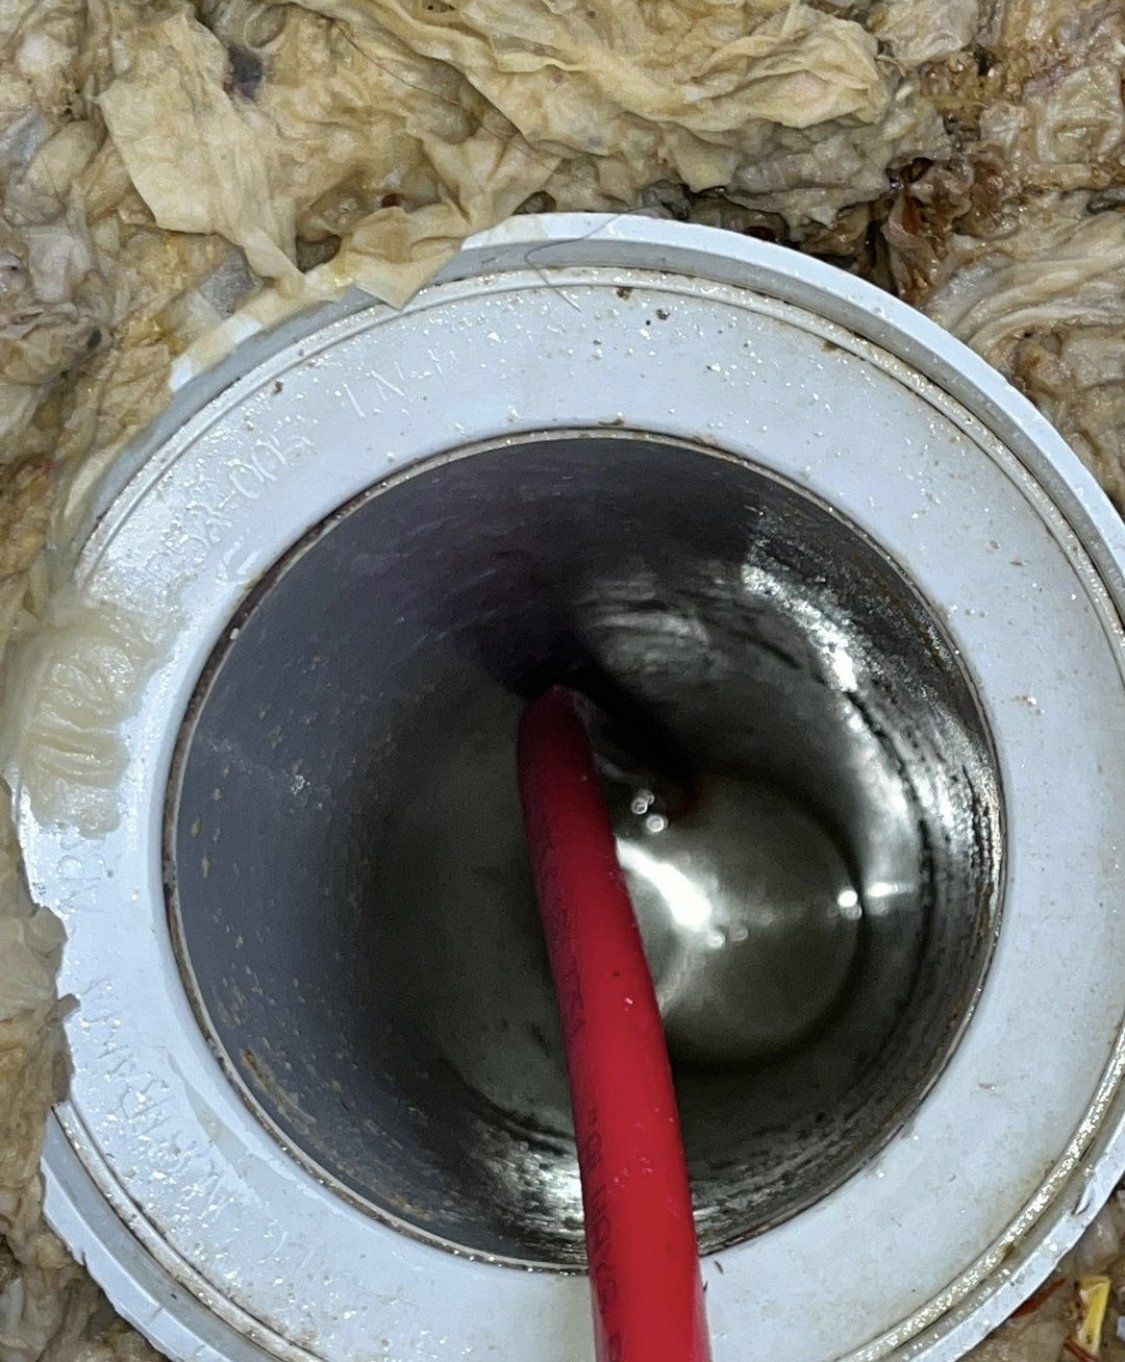 Image depicts CCTV technology being used down what was a blocked sewer PVC pipe. The camera is attached to a long red cable rigid enough to push down through a blockage.